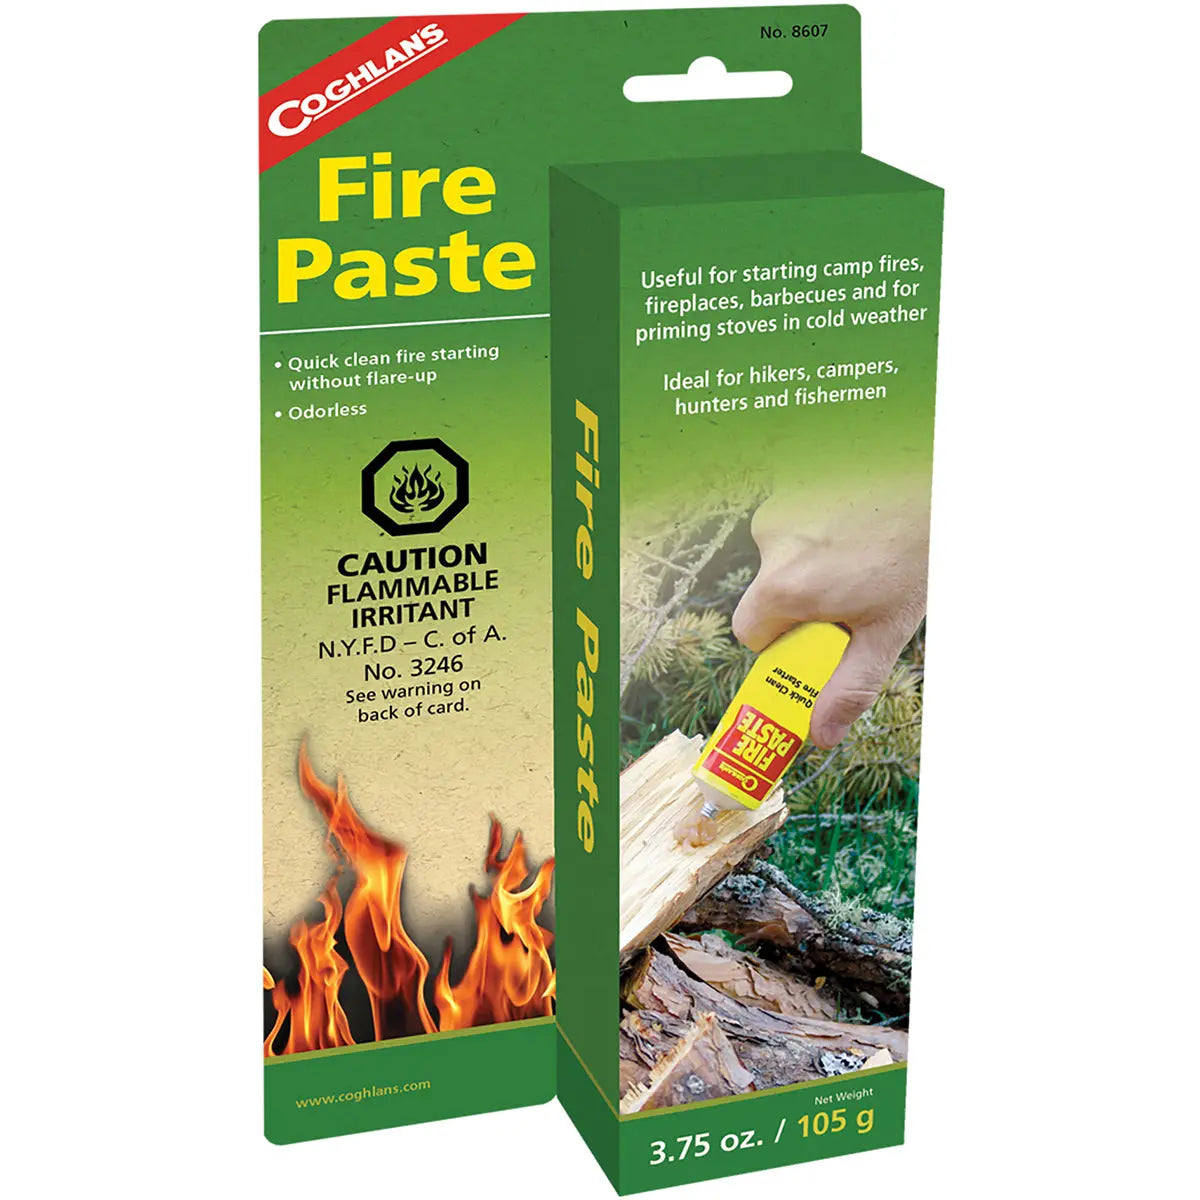 Coghlan's Fire Paste, Emergency Camping Survival Fireplace Campfire Starter Coghlan's